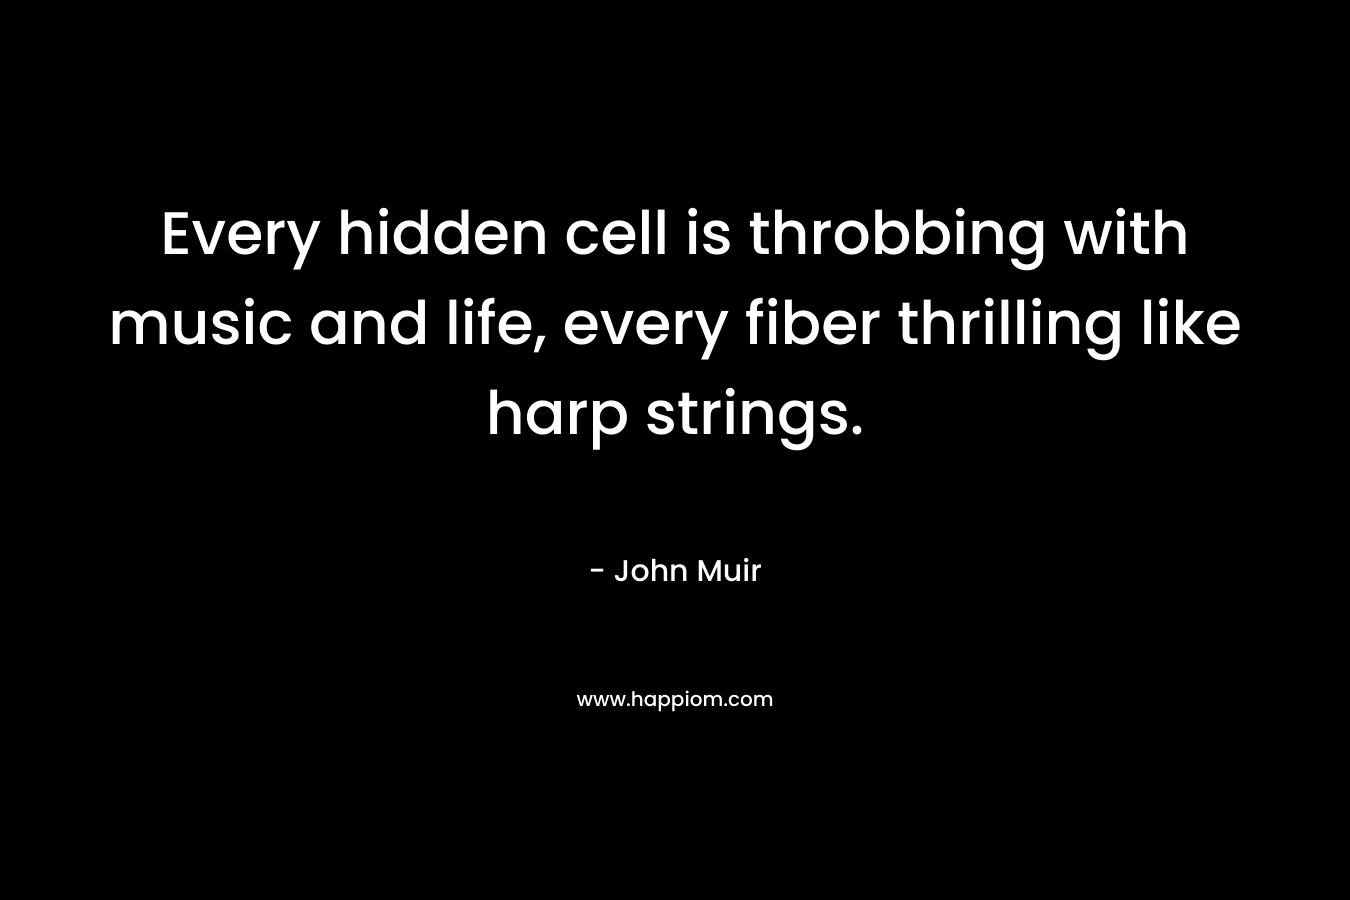 Every hidden cell is throbbing with music and life, every fiber thrilling like harp strings.